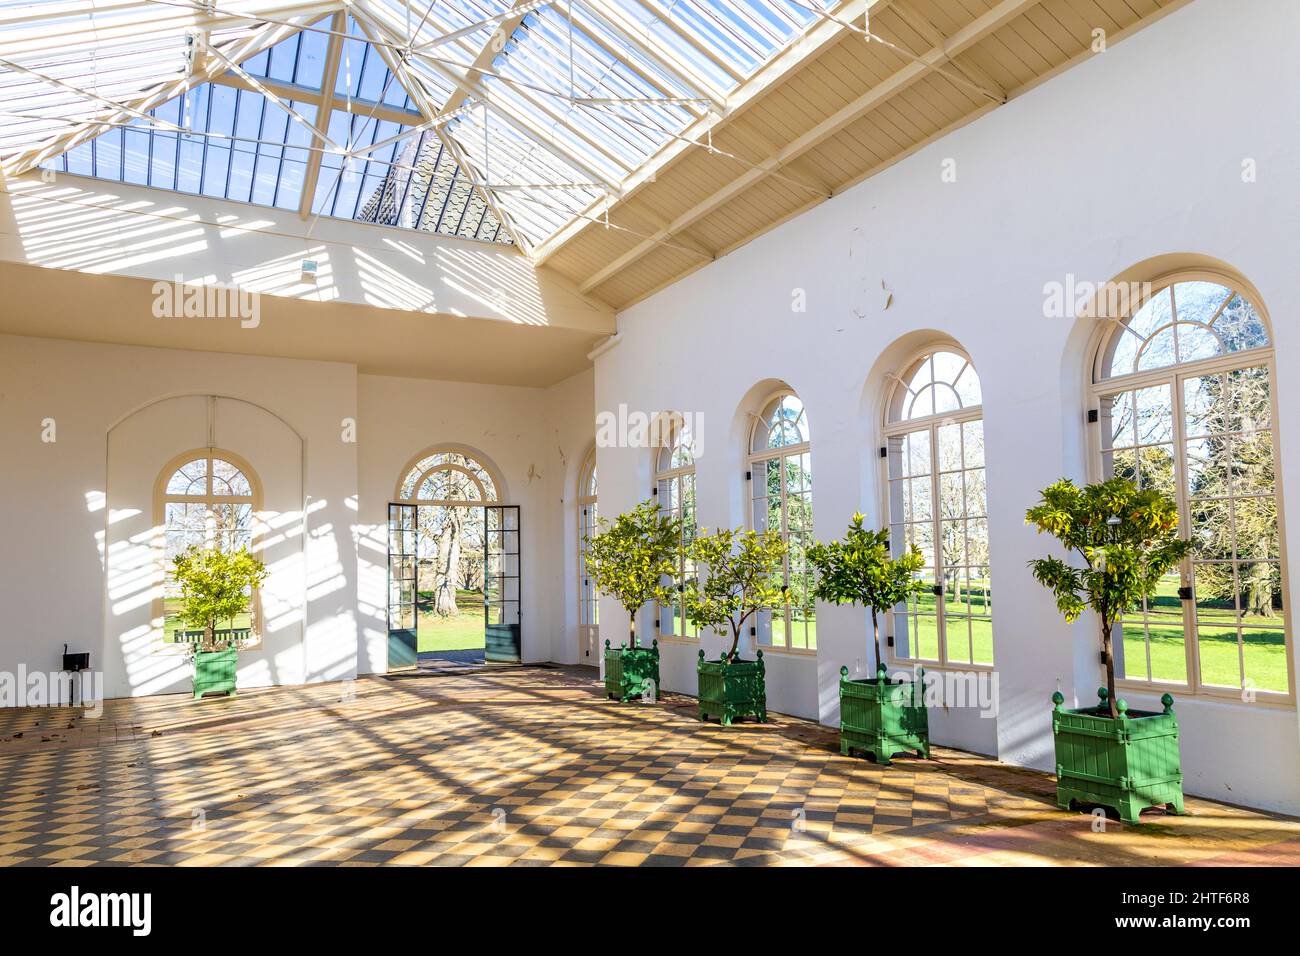 Interior of the 19th century Orangery by Thomas Philip, 2nd Earl de Grey and James Clepham at Wrest Park, Bedfordshire, UK Stock Photo